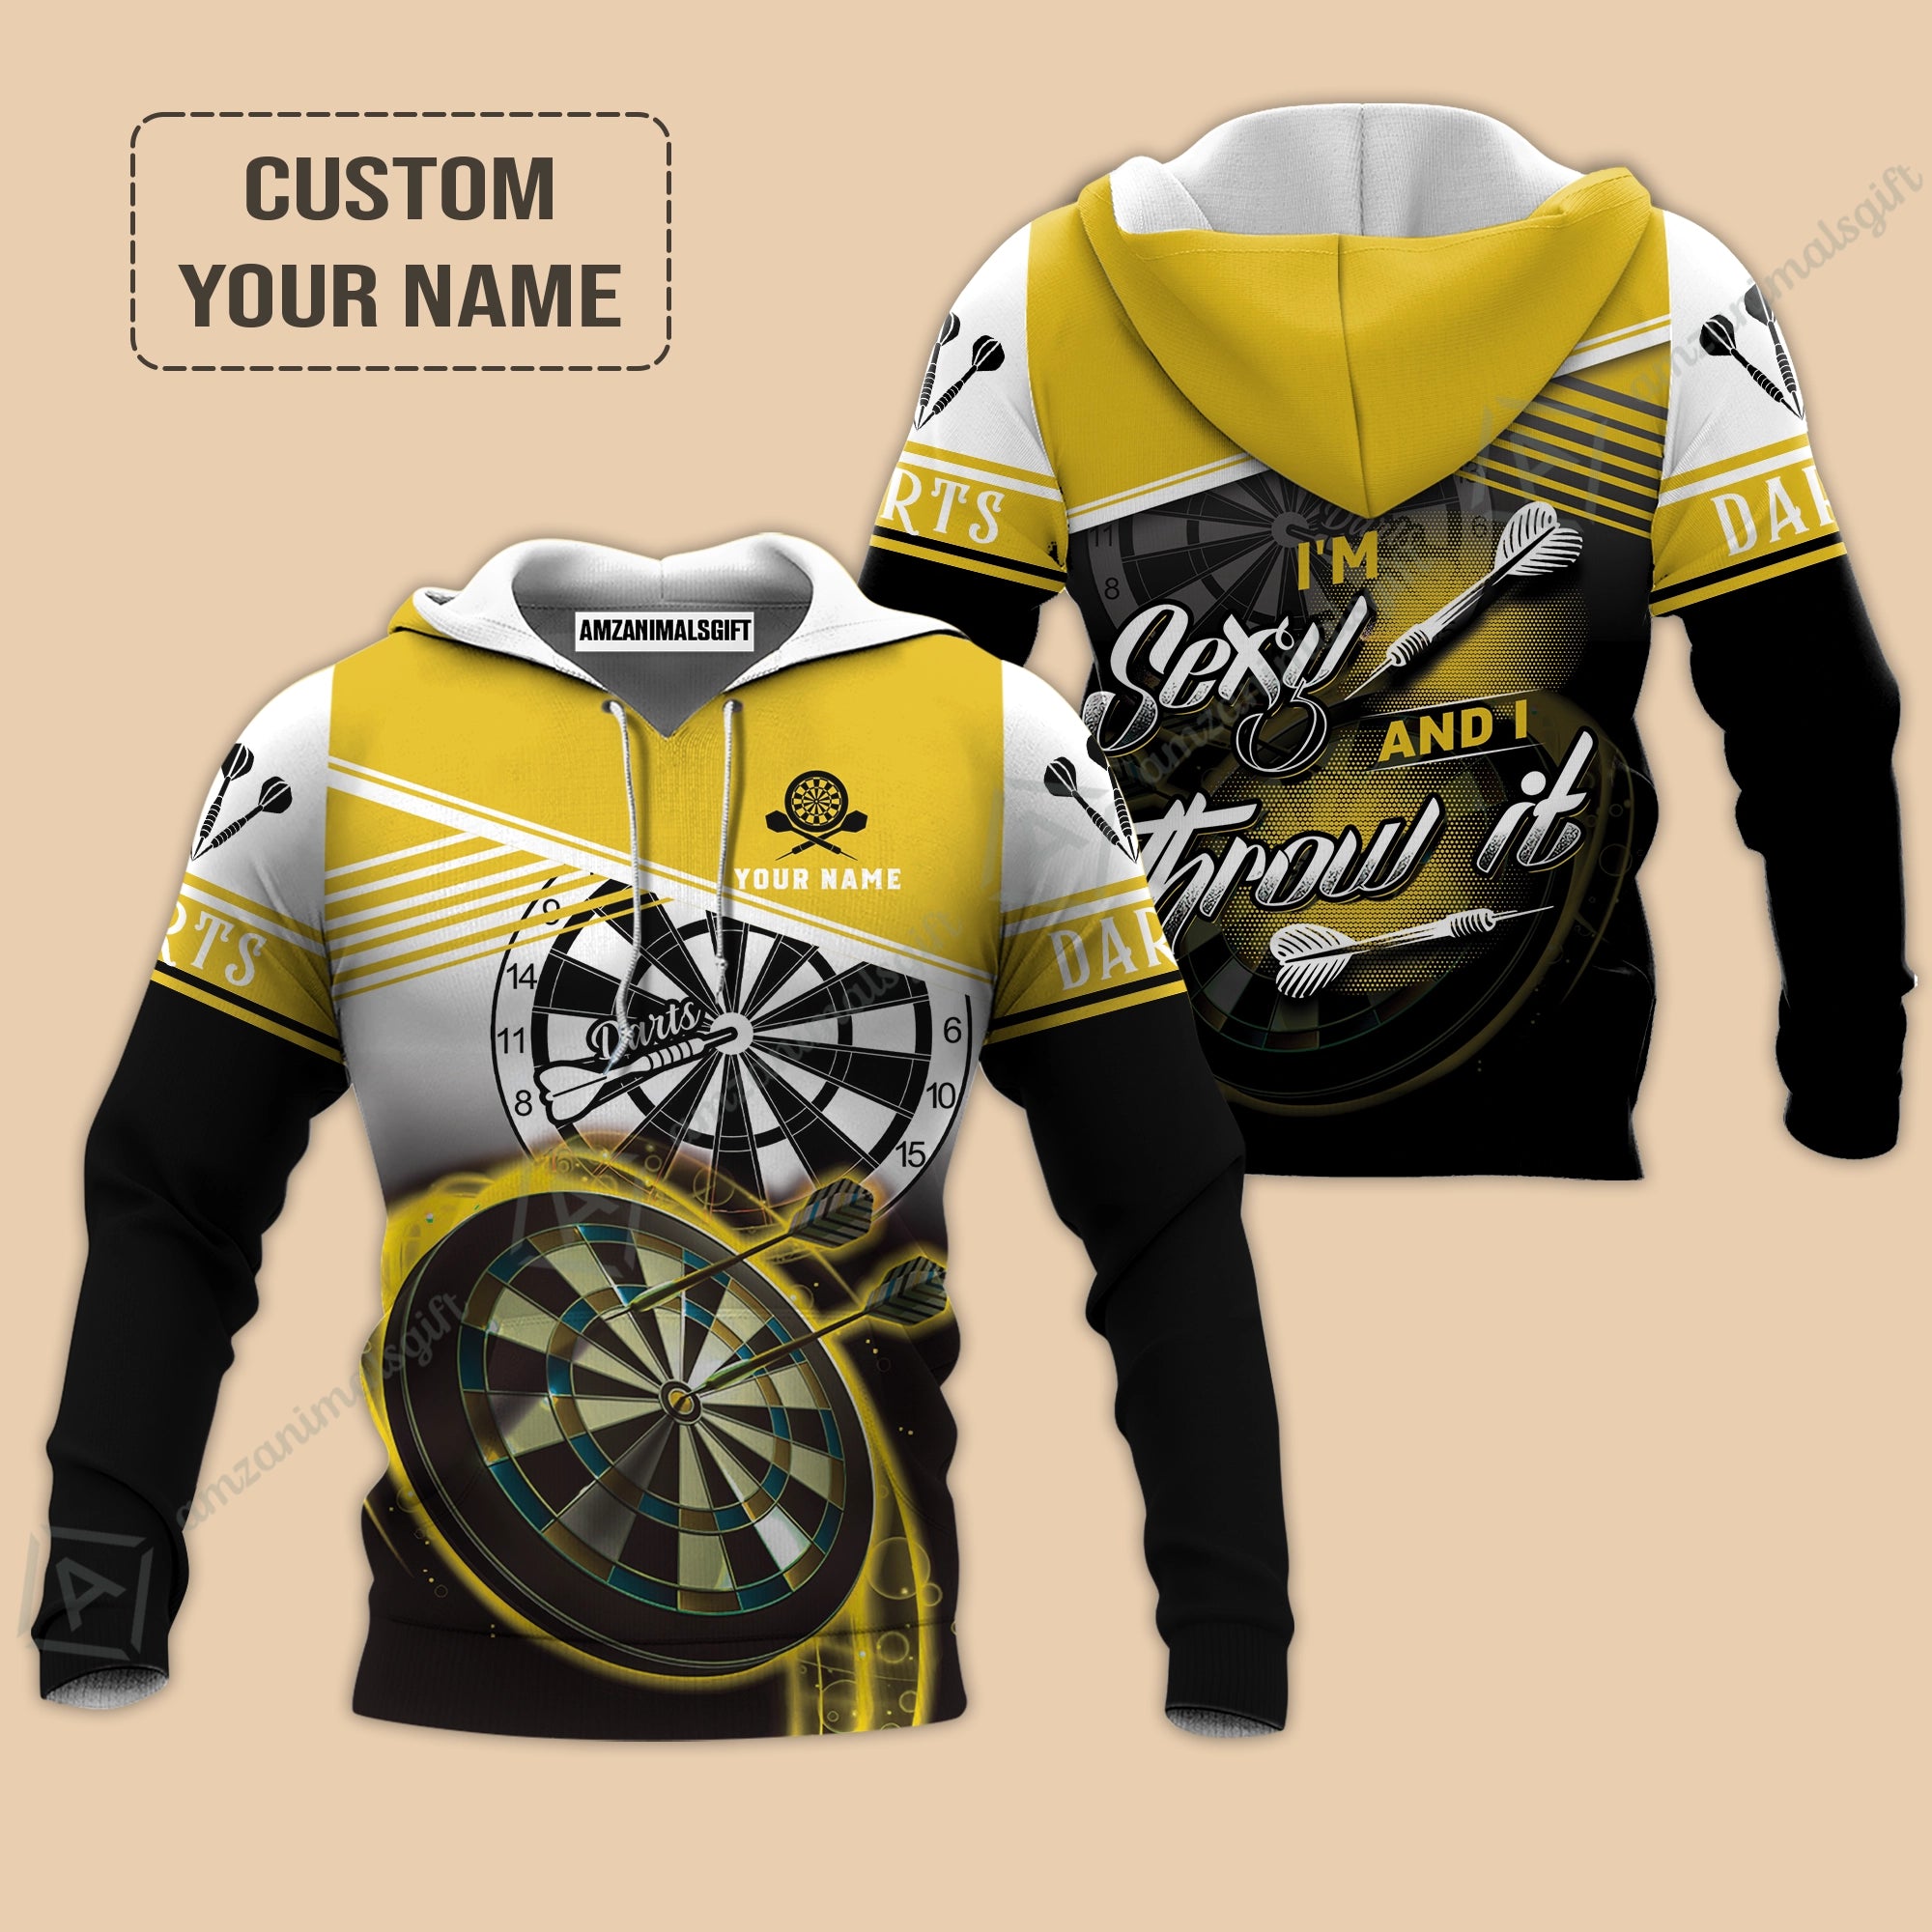 Personalized Darts Hoodie, Darts Yellow Color Custom Shirt I'm Sexy And I Throw It, Outfits For Darts Players, Darts Team